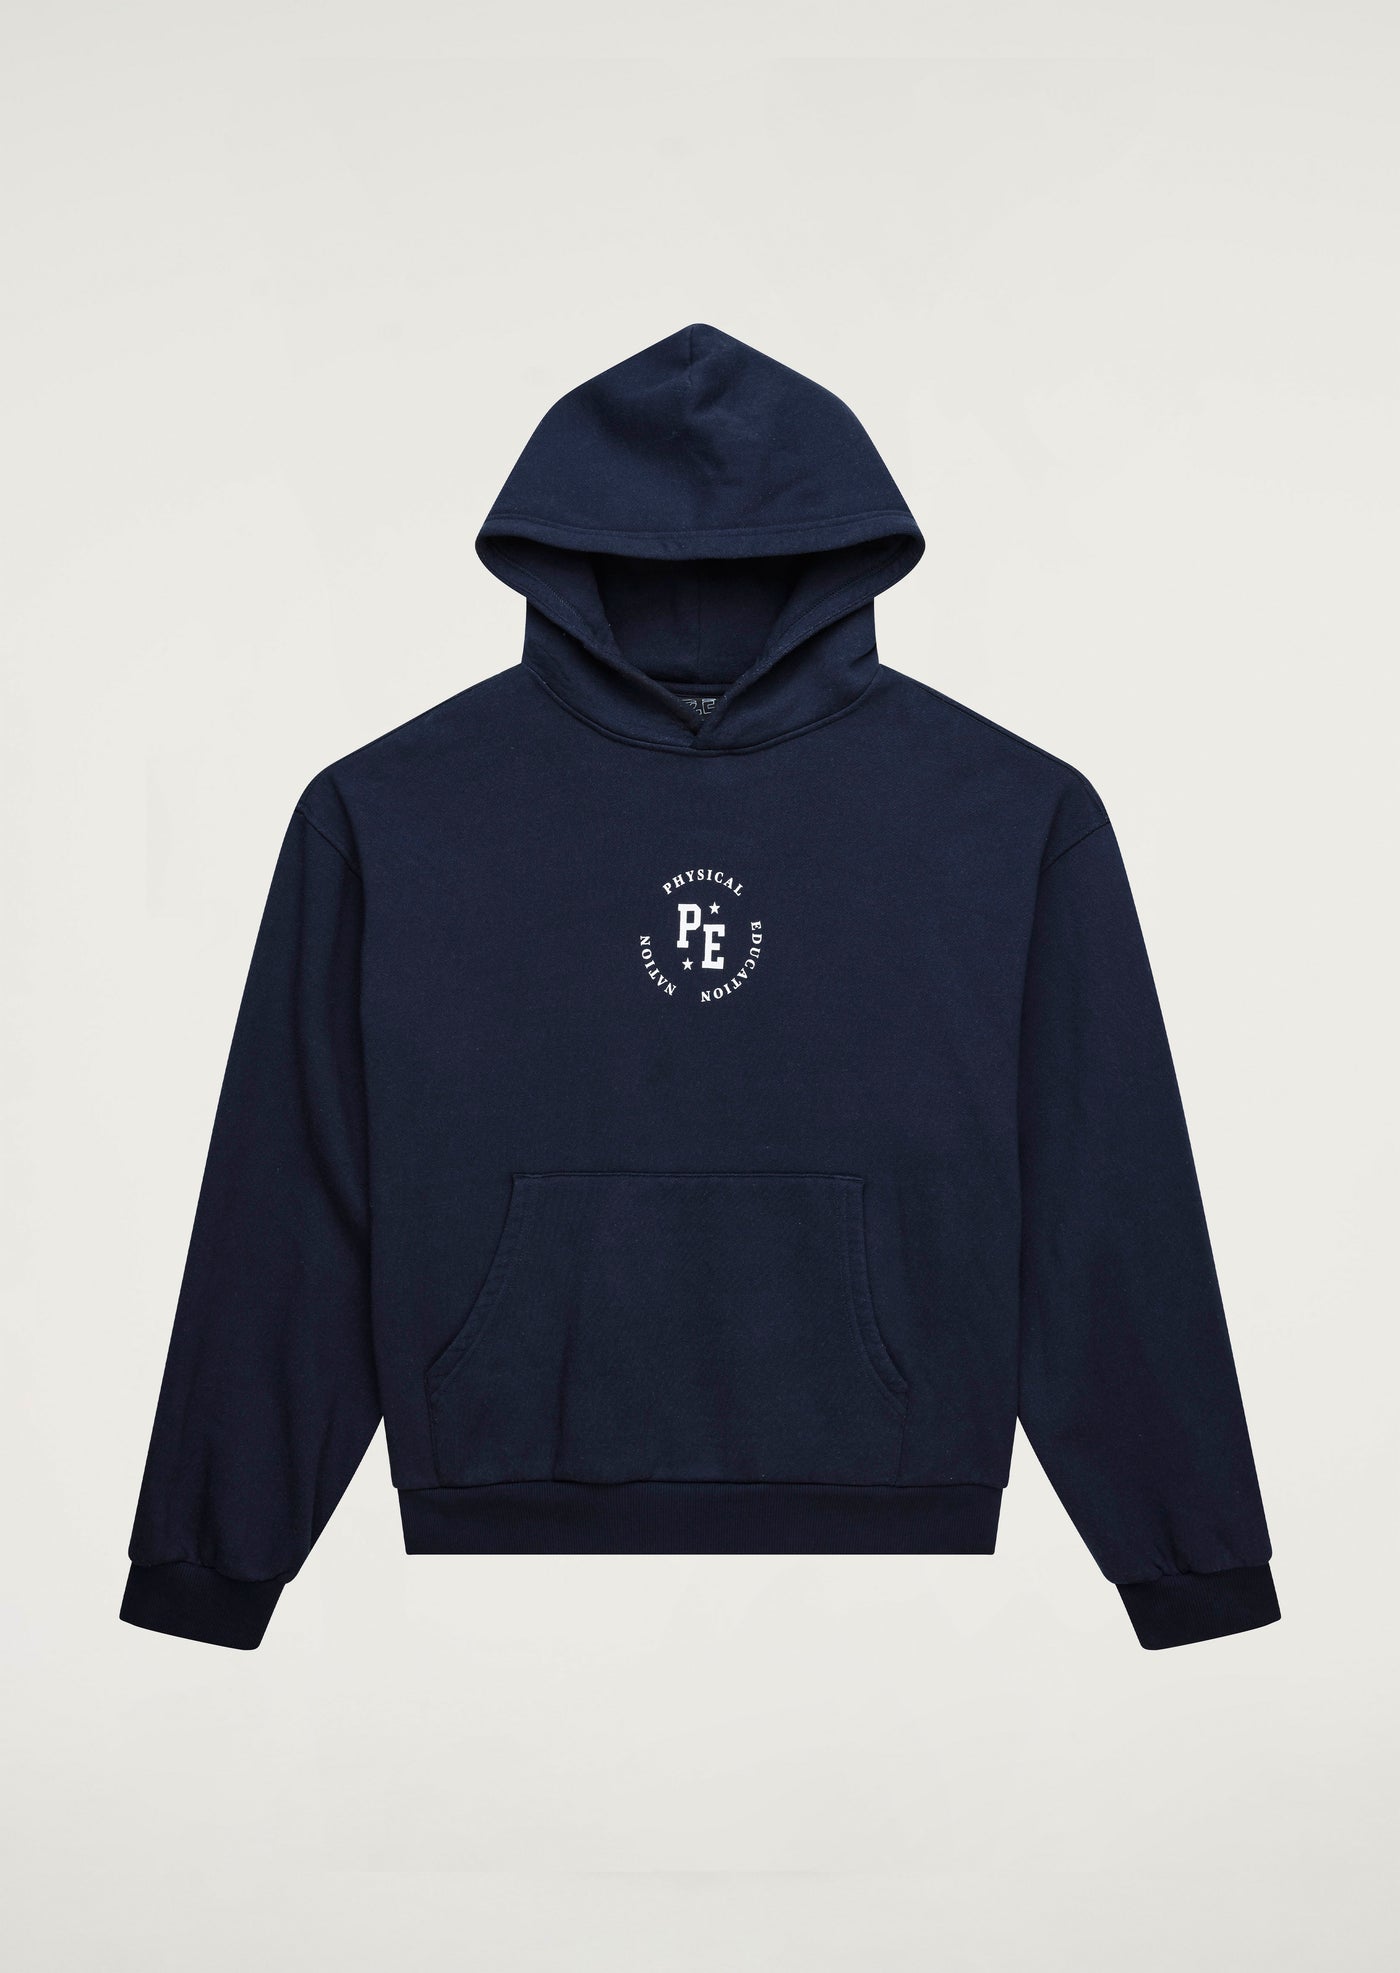 PHYSICAL HOODIE IN WASHED DARK NAVY